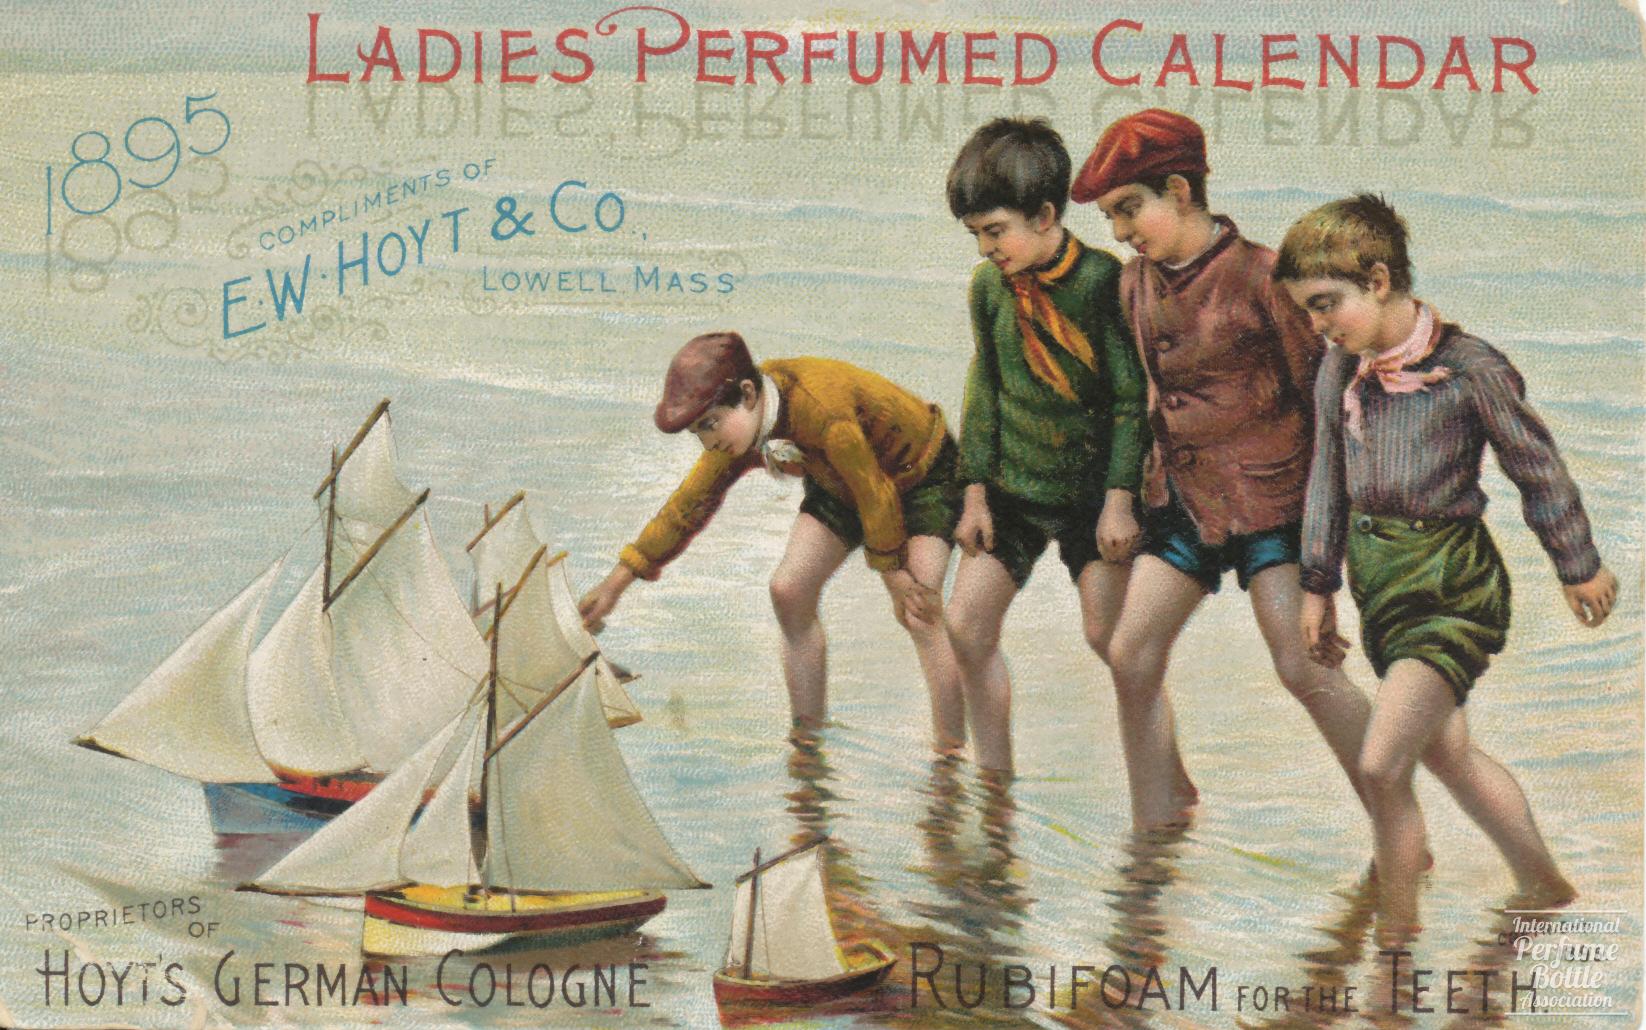 "Hoyt's German Cologne" Scent Card by E. W. Hoyt & Co. With 1895 Calendar